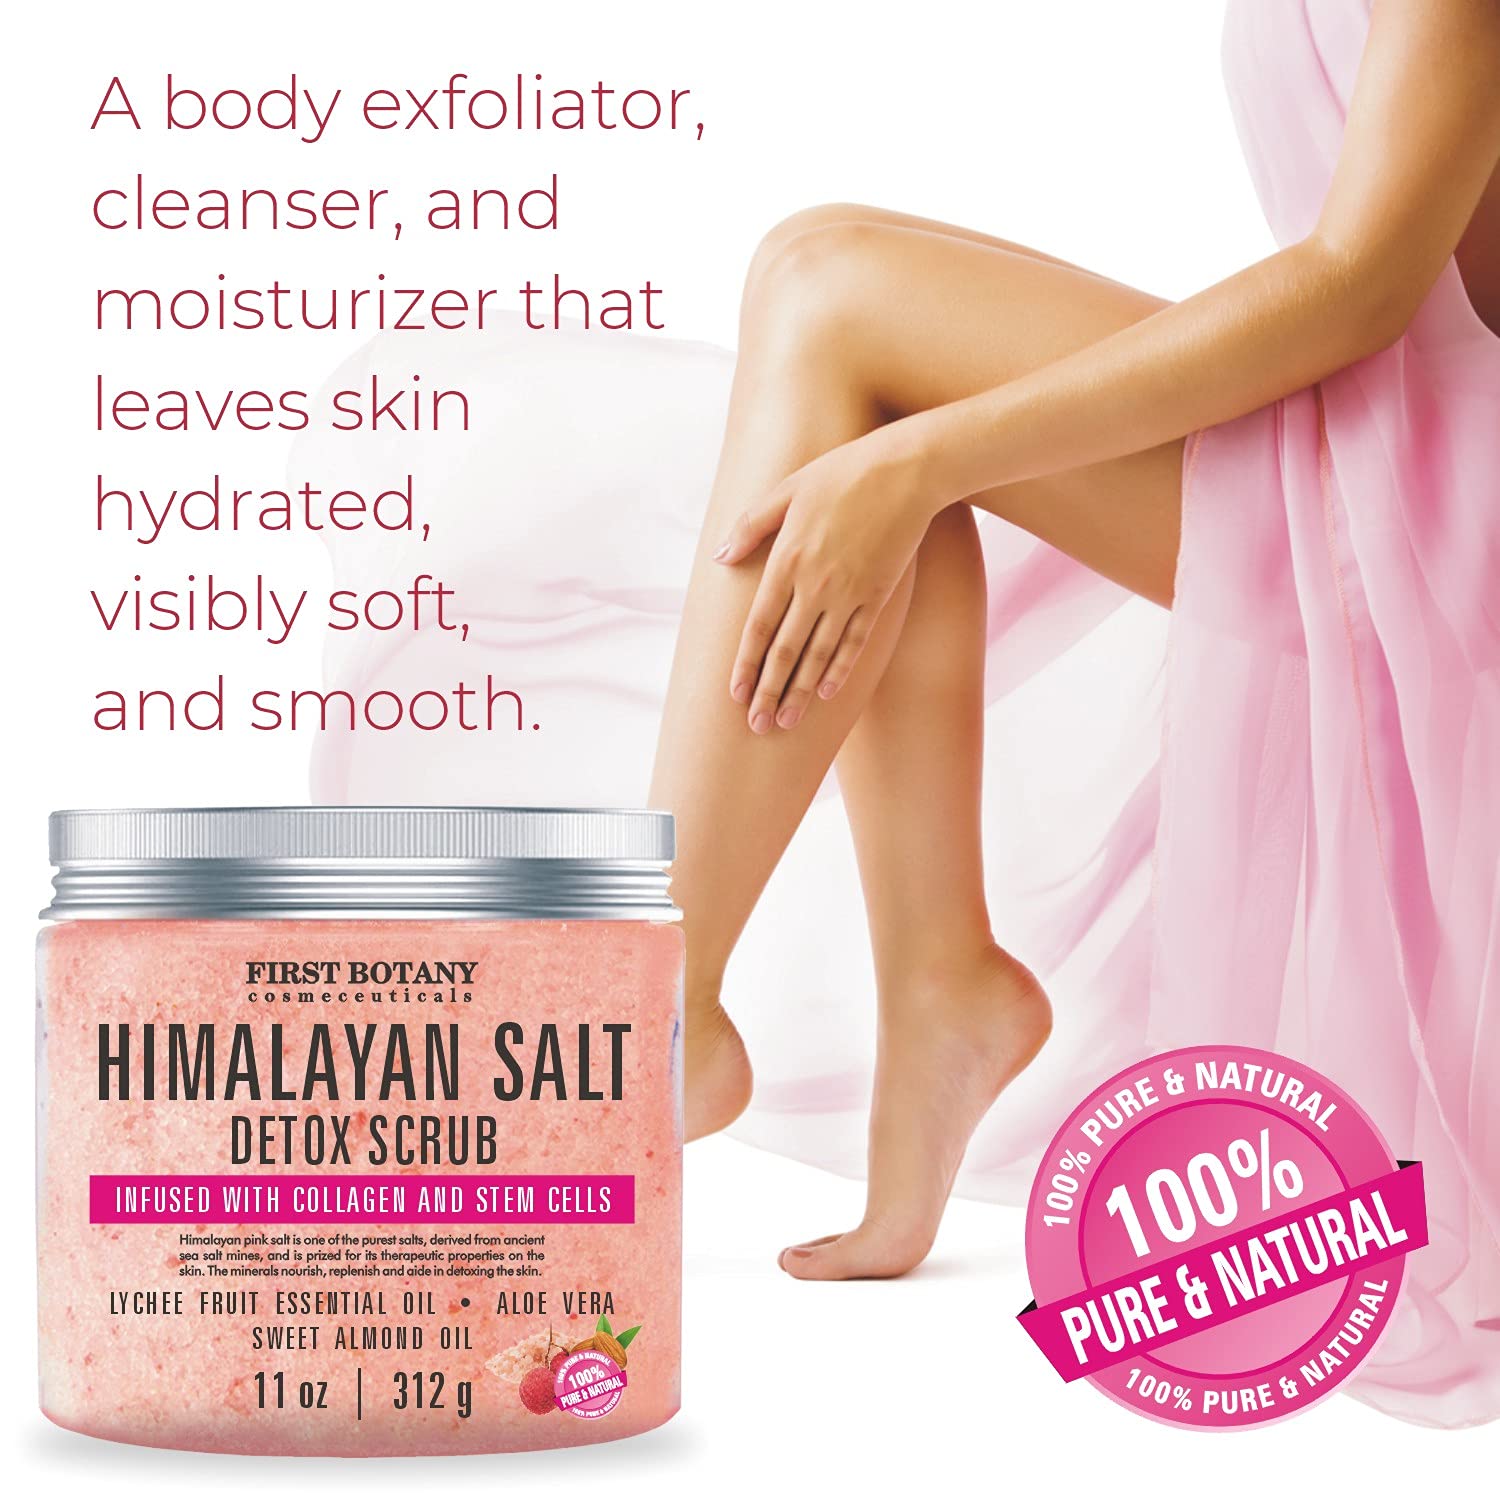 Himalayan Salt Body Scrub with Collagen and Stem Cells - Natural Exfoliating Salt Scrub & Body and Face Souffle helps with Moisturizing Skin, Acne, Cellulite, Dead Skin Scars, Wrinkles (11 oz)